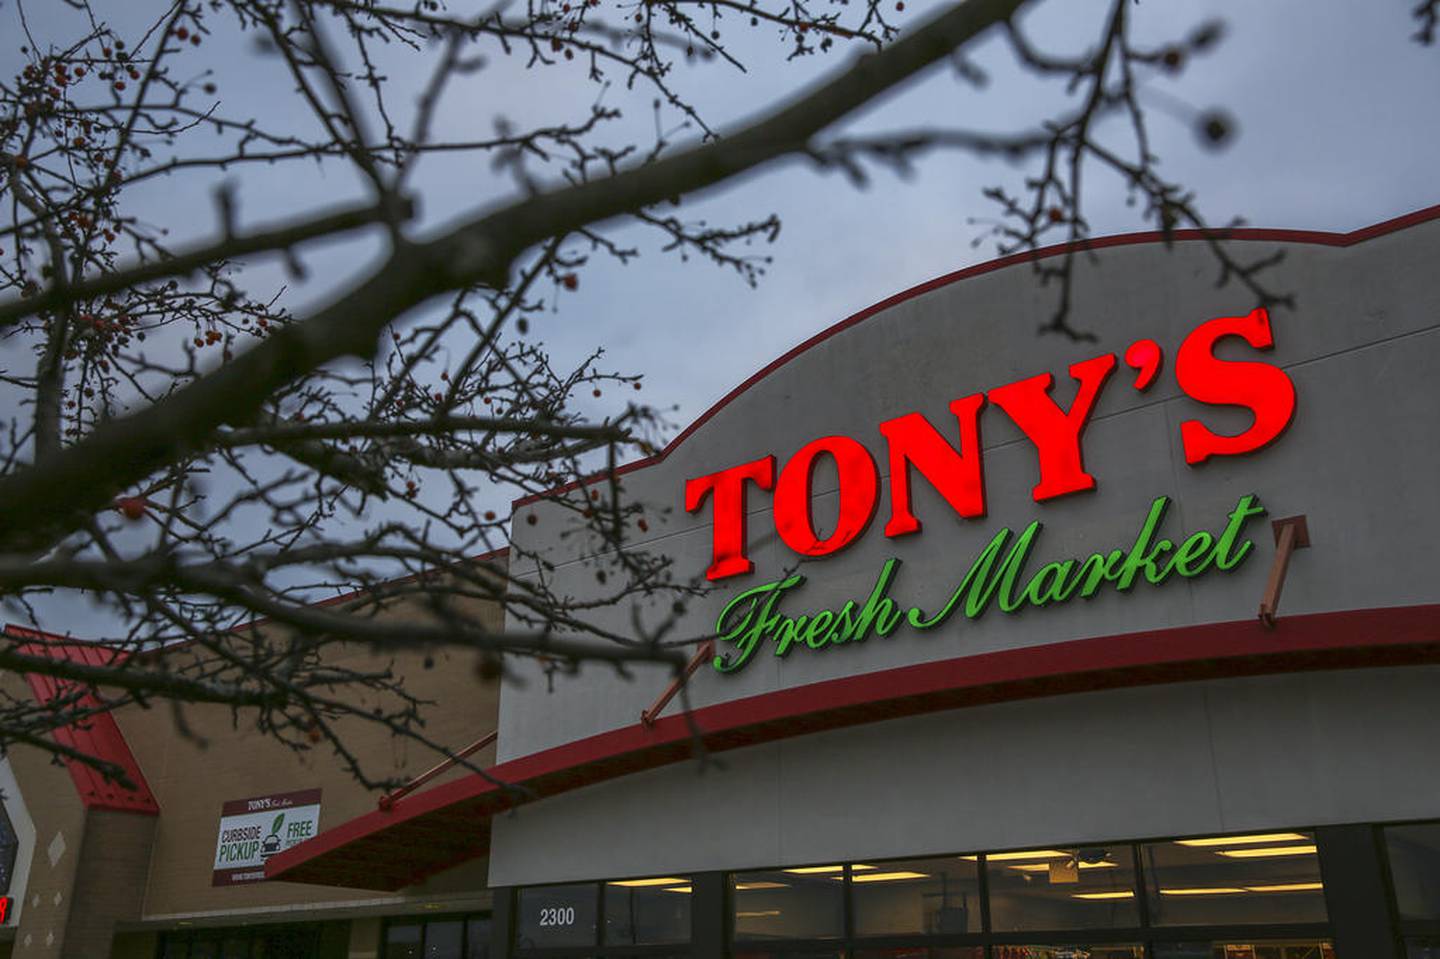 Tony’s Fresh Market is plans to open a second Joliet store in 2021 at the corner of Jefferson Street and Larkin Ave.